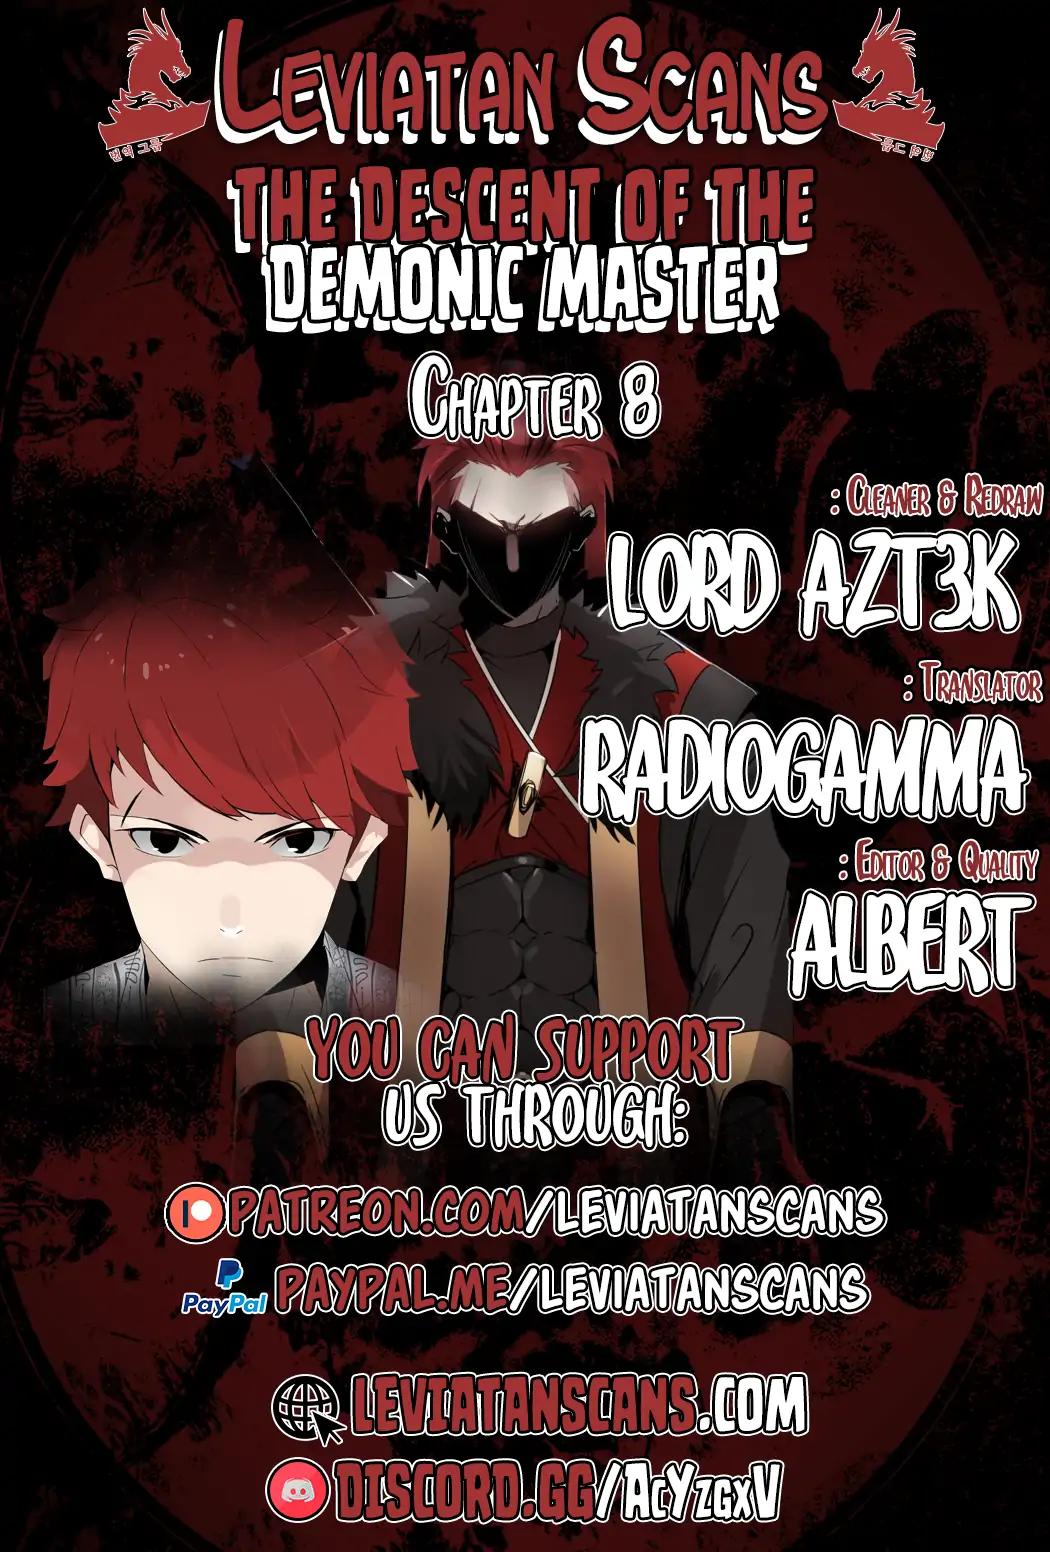 The Descent of the Demonic Master Chapter 8